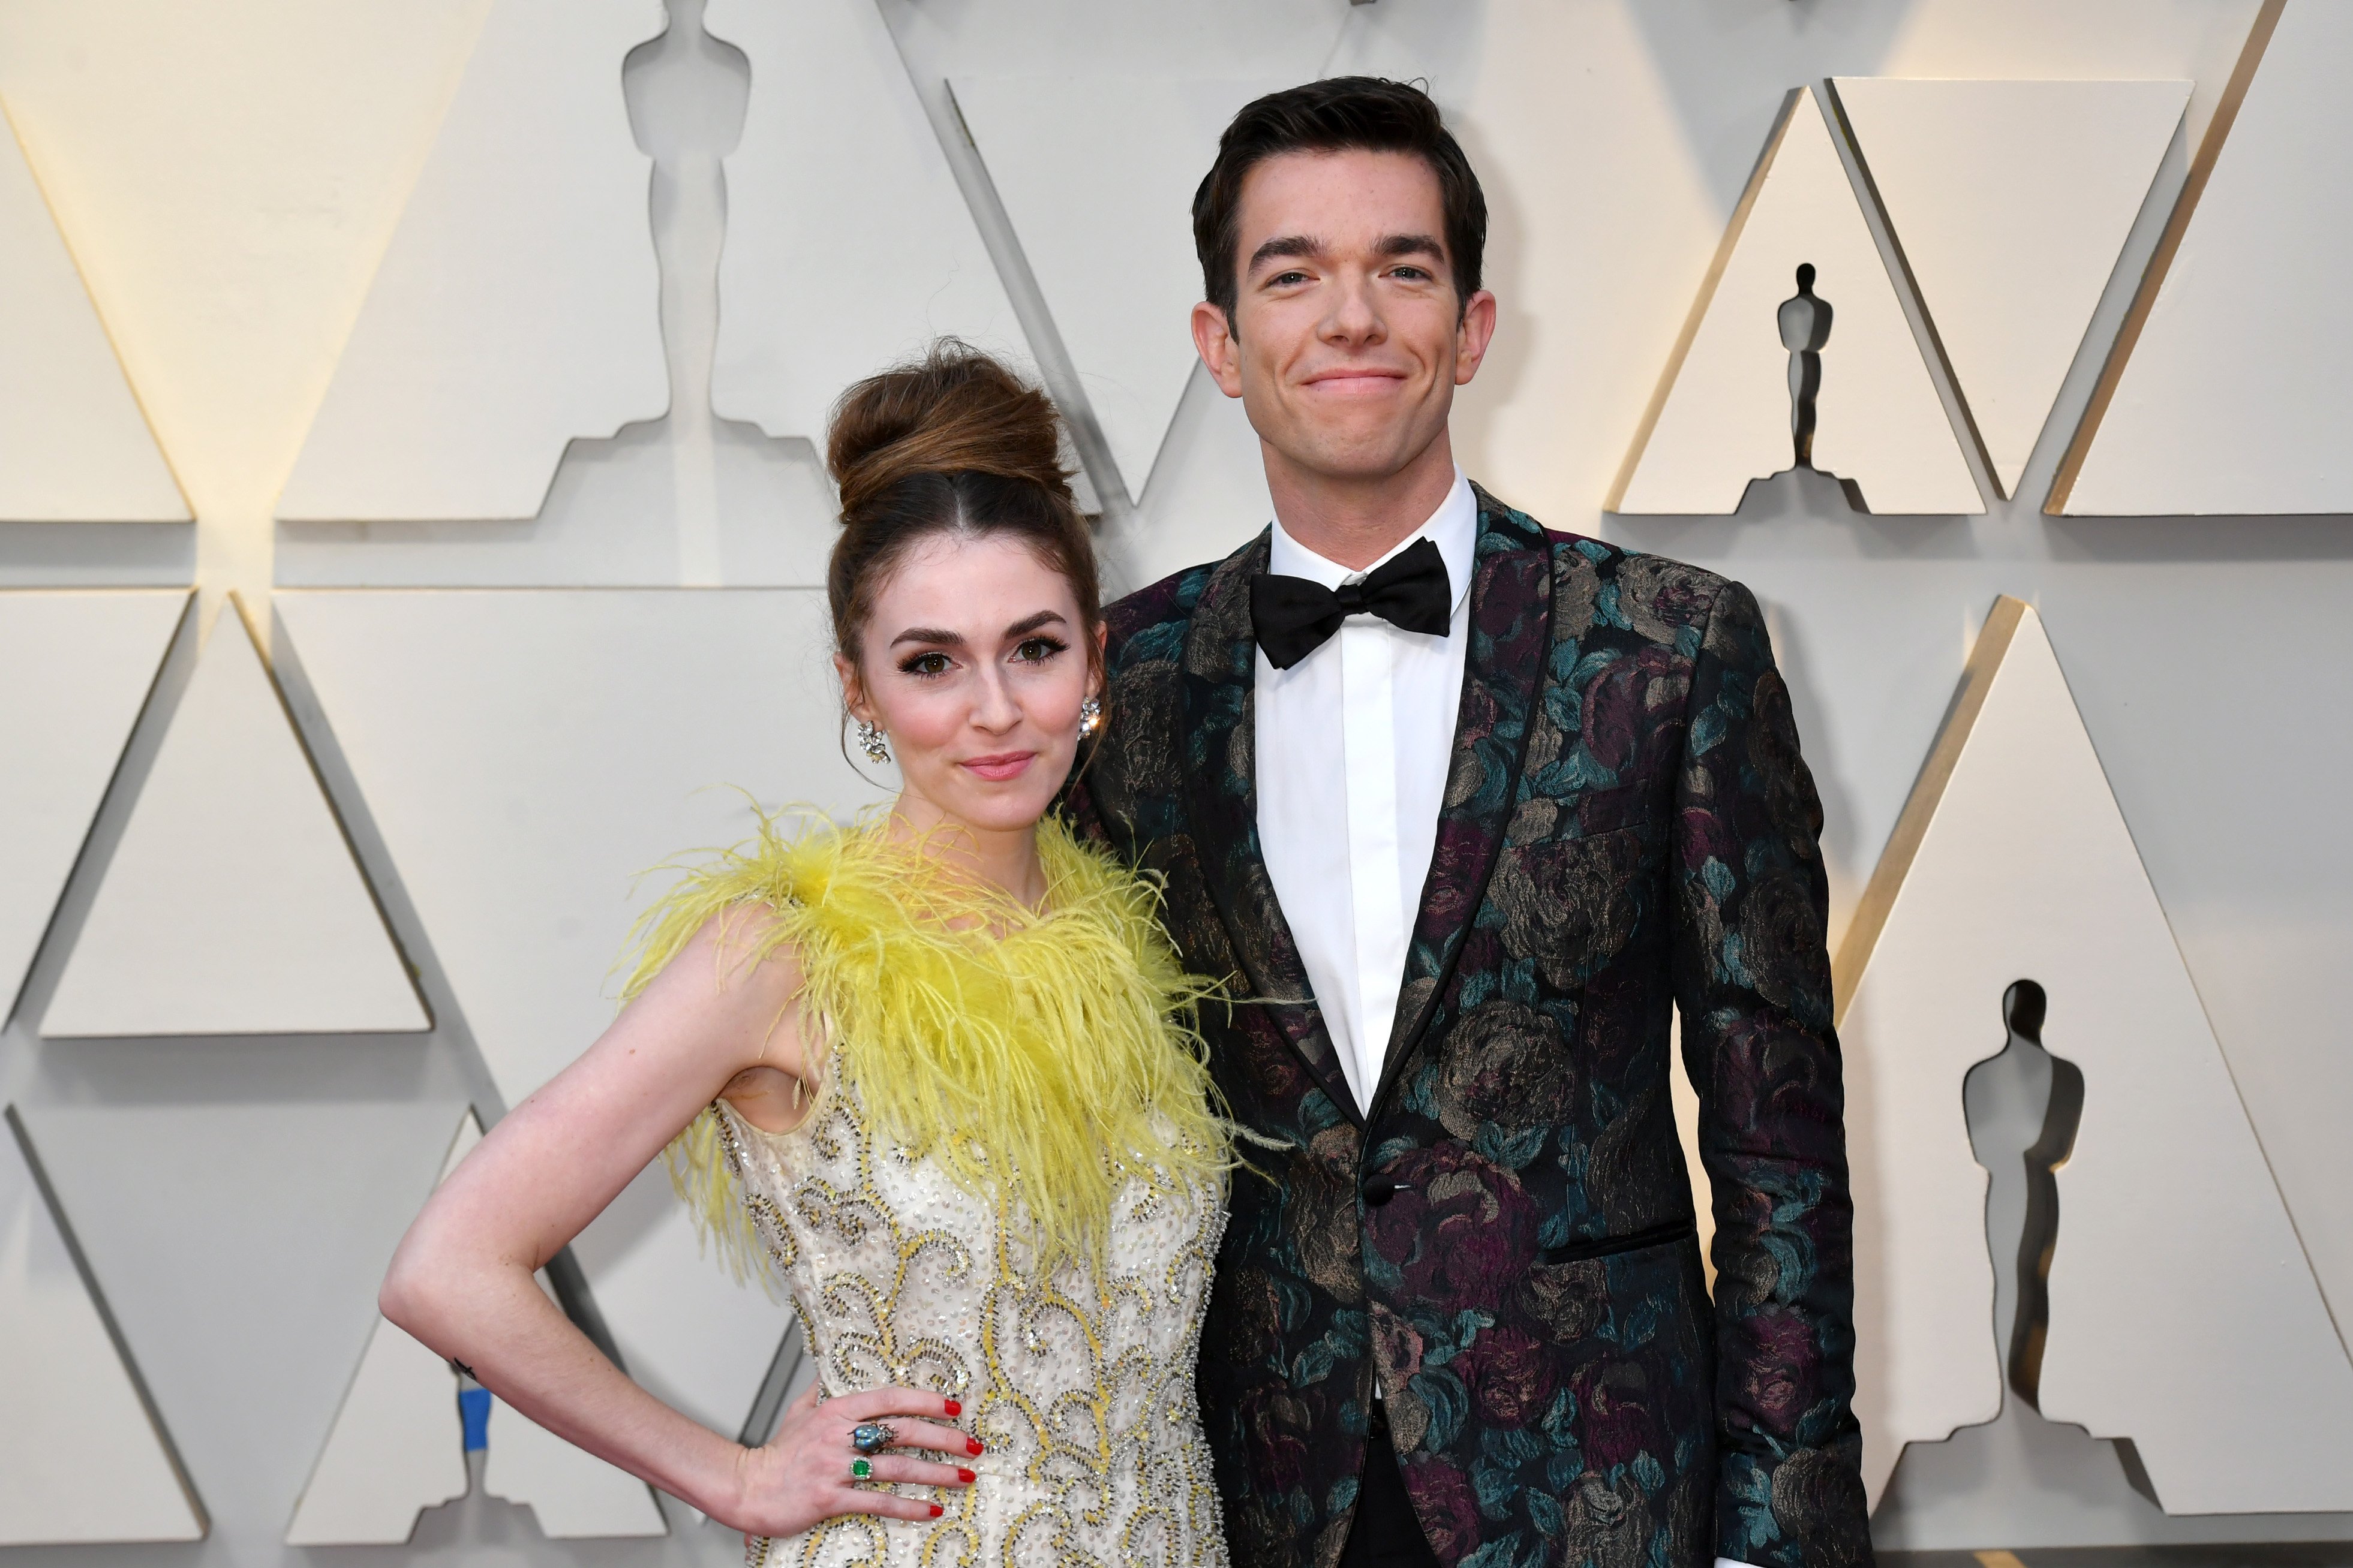 Anna Marie Tendler and John Mulaney attend the 91st Annual Academy Awards in 2019